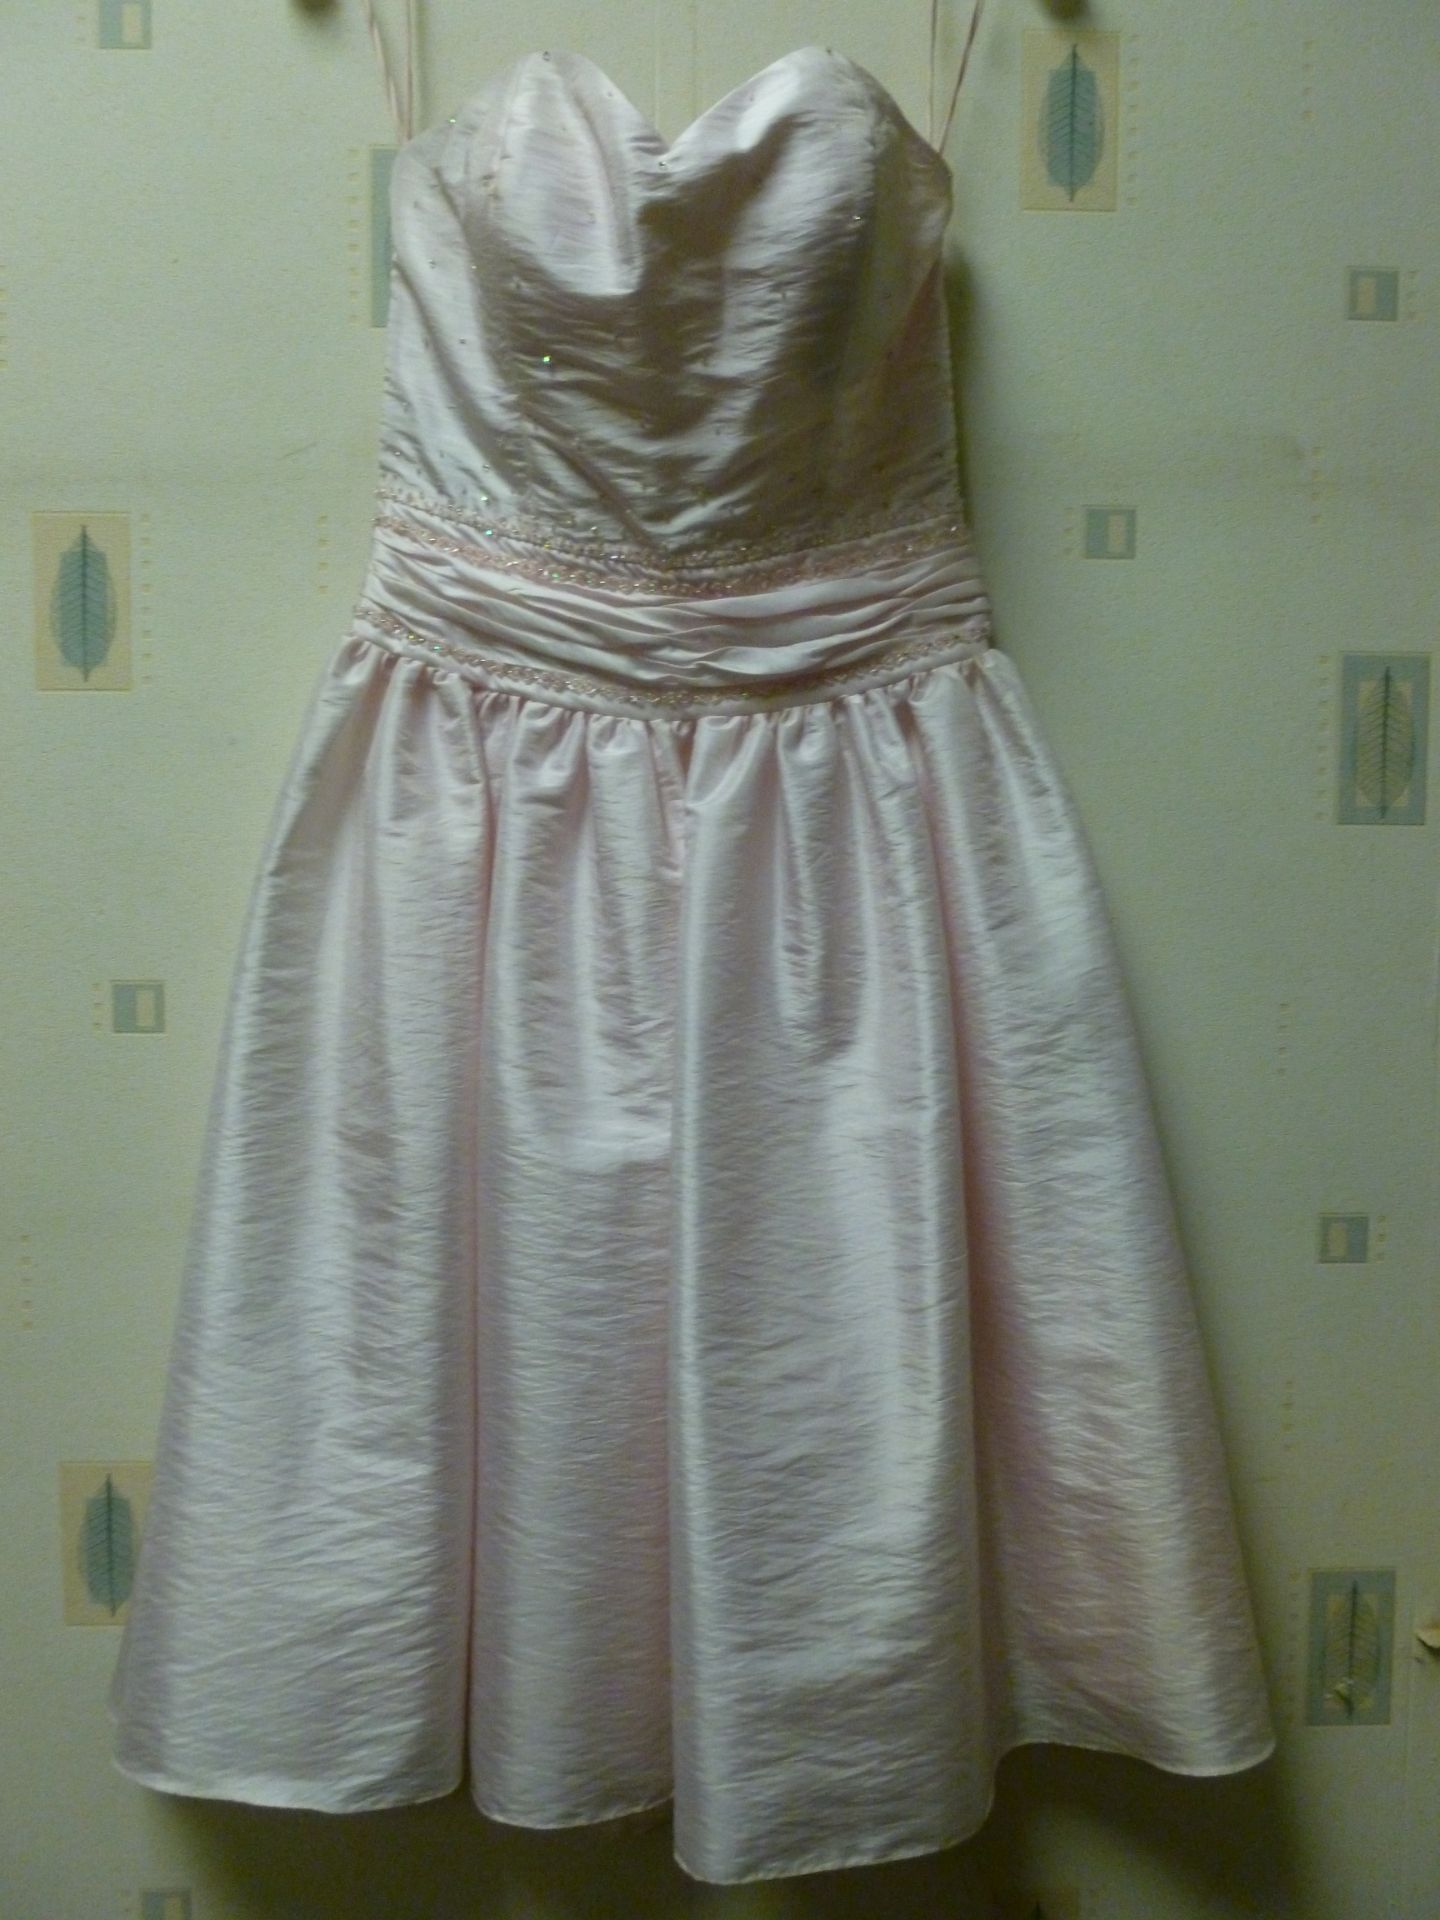 Eclipse Evening wear Baby Pink Dress RRP £99.99 Size 10